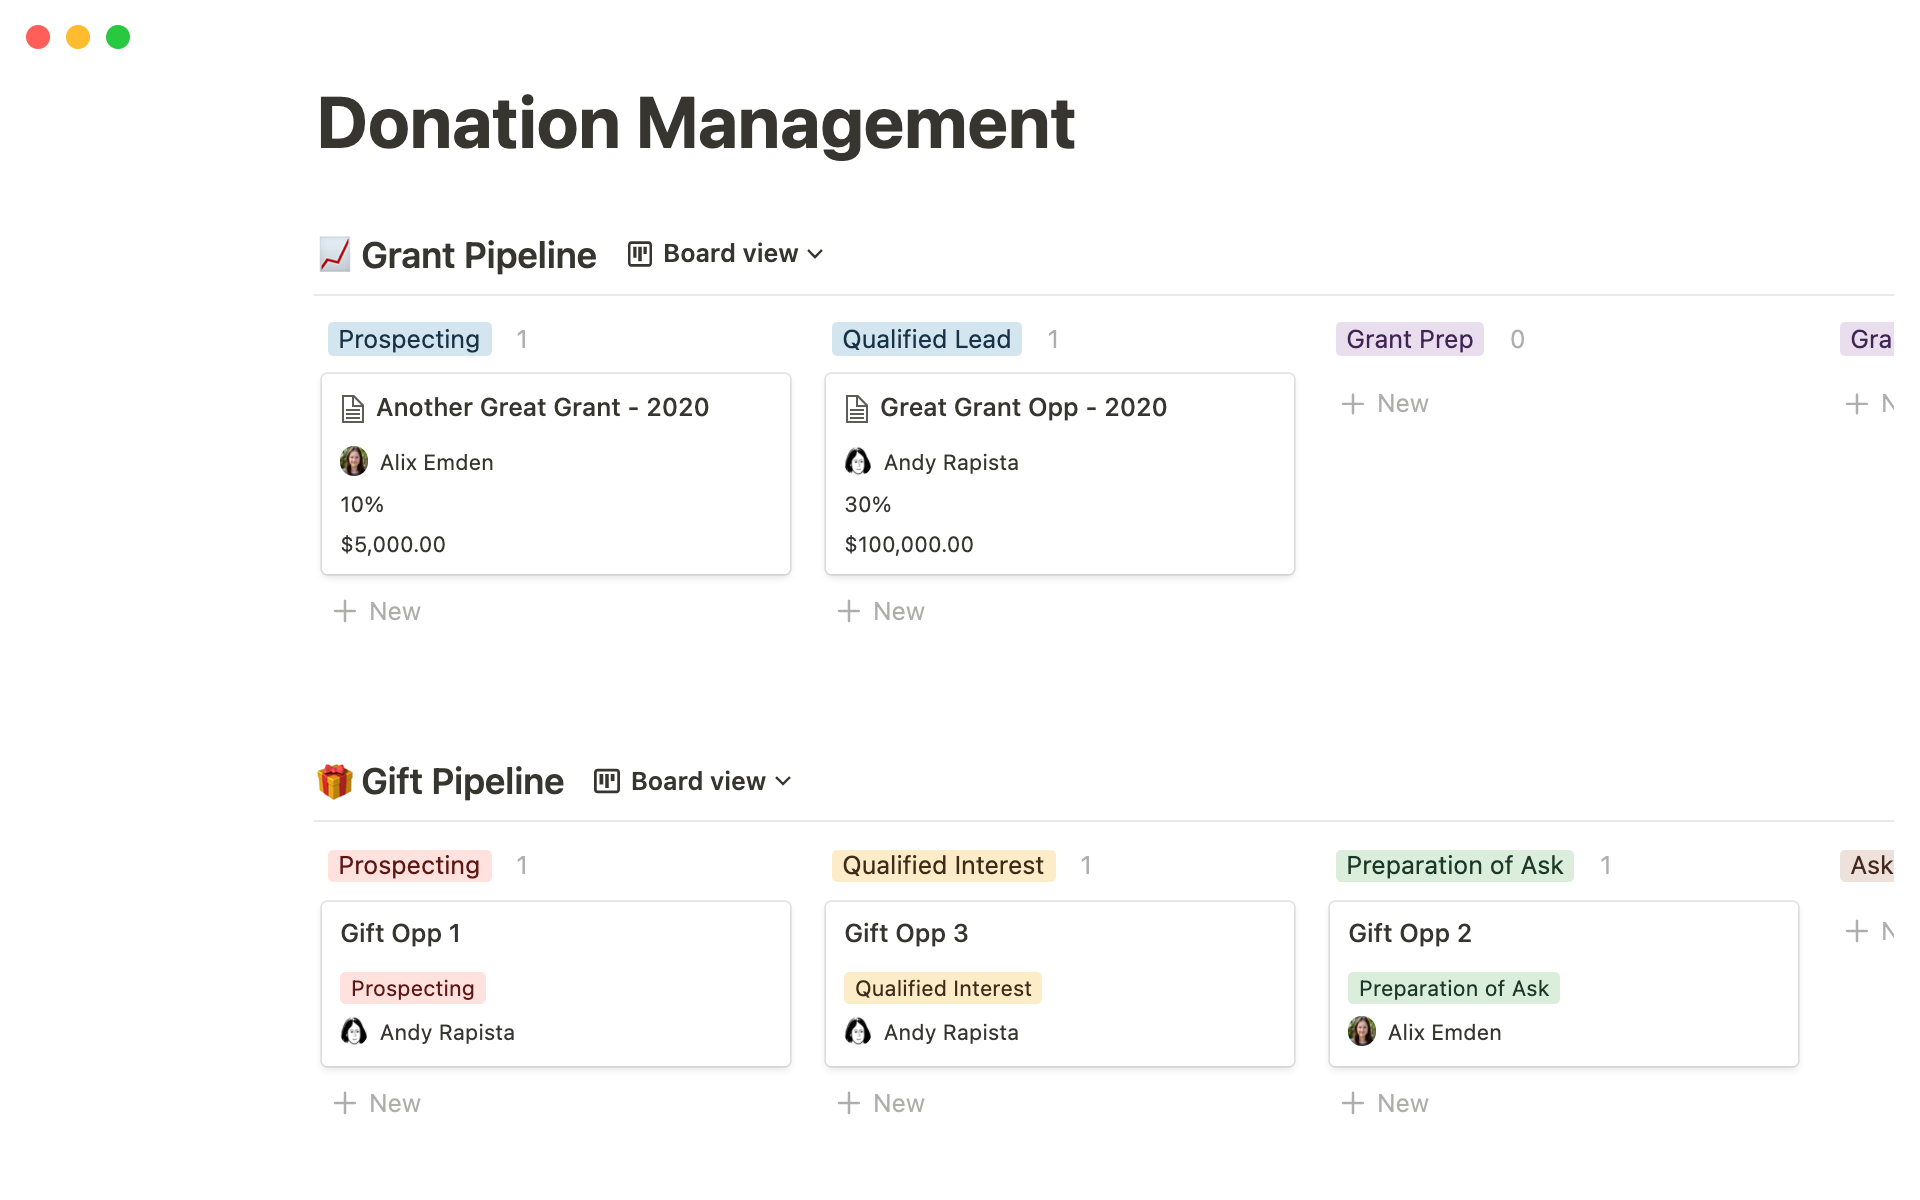 Manage your nonprofit's grant and gift pipelines in this donation management template.